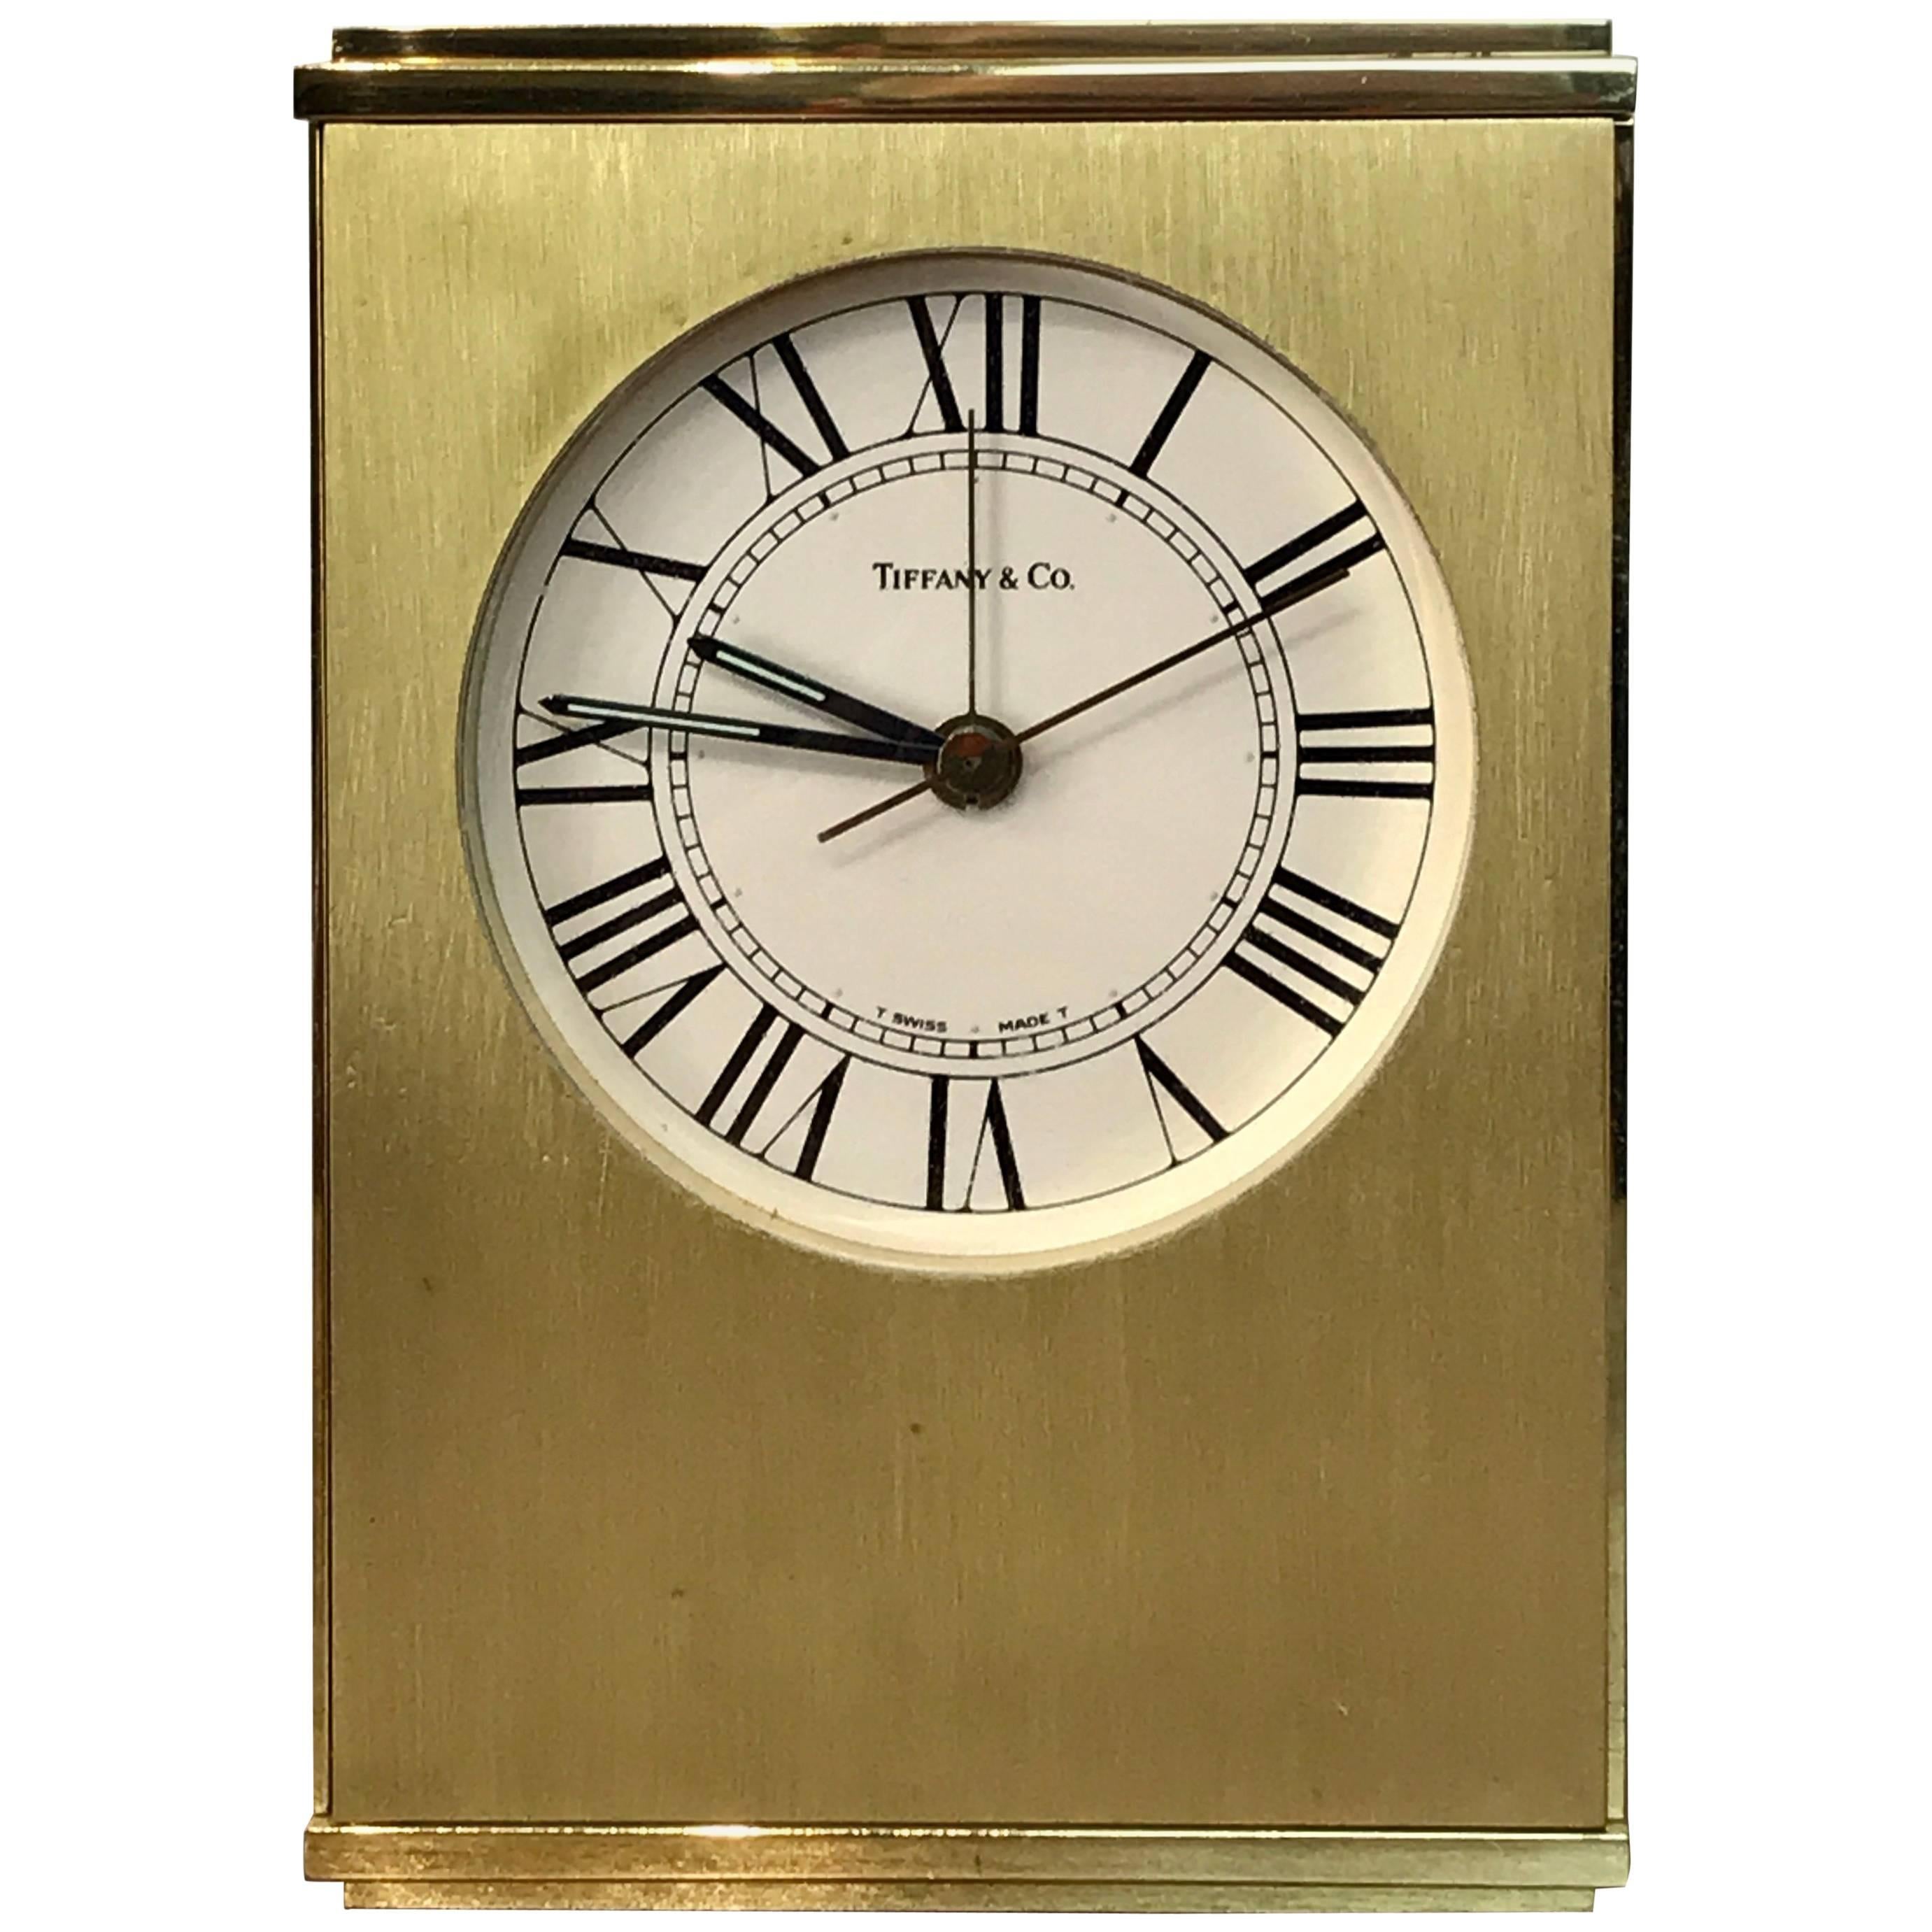 Tiffany & Co. Swiss Movement Table Alarm Clock, with Concealed Chamber